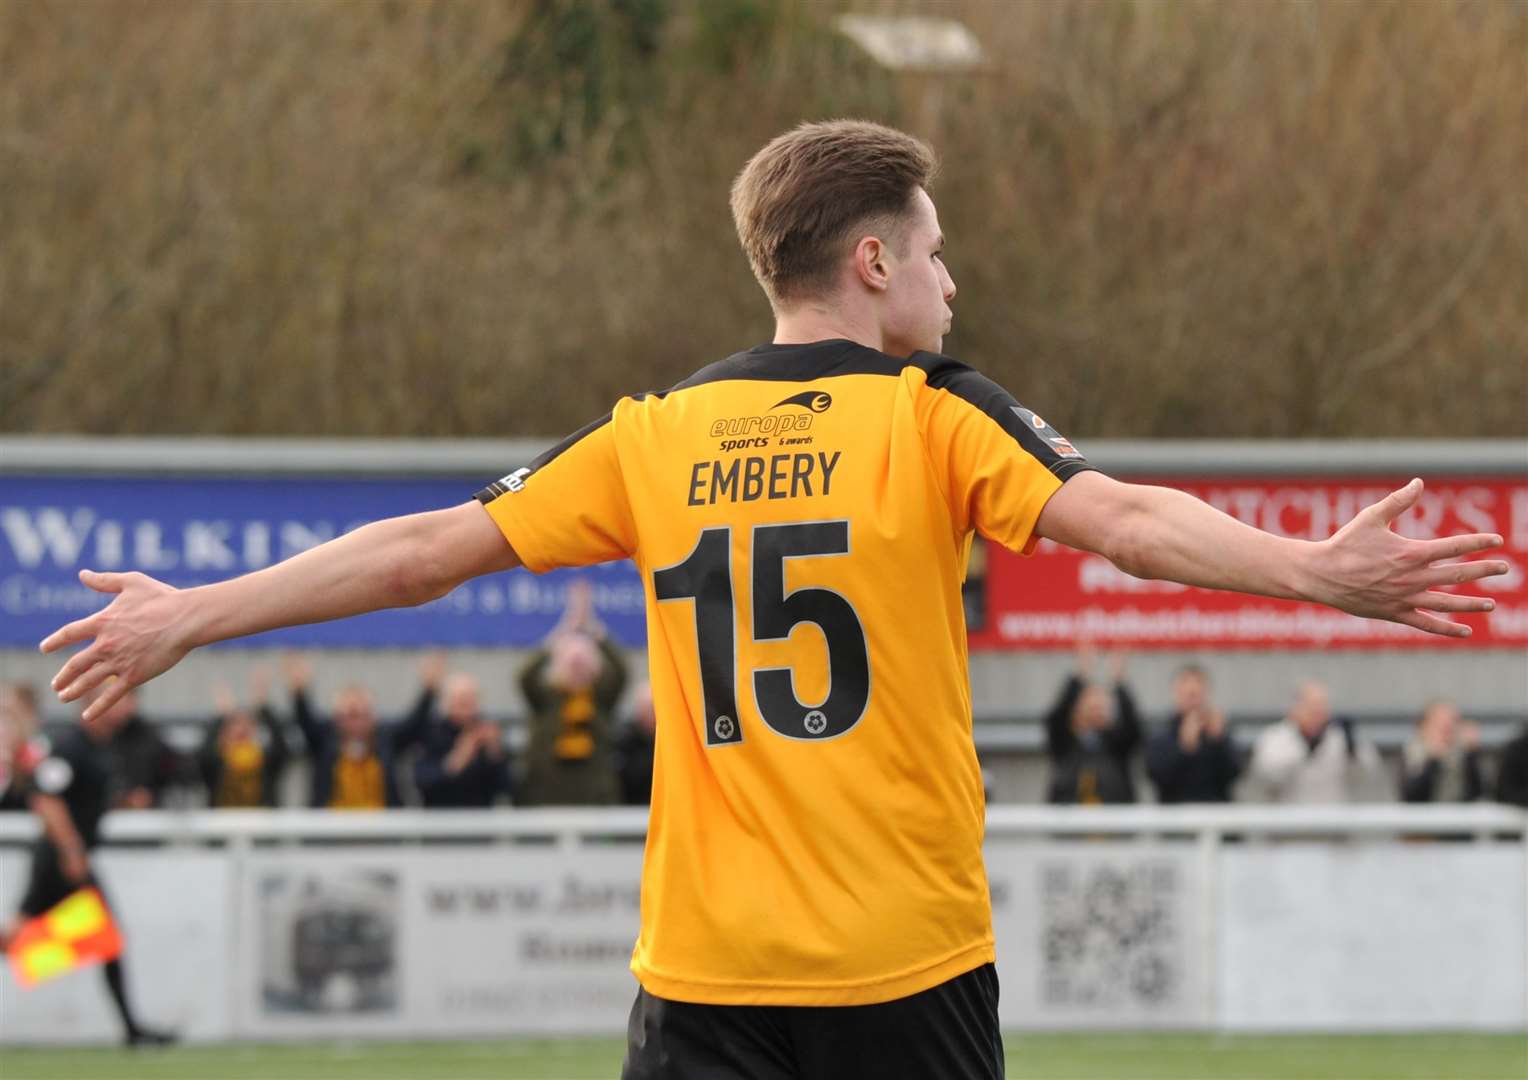 Jake Embery scored on his first National League start for Maidstone Picture: Steve Terrell